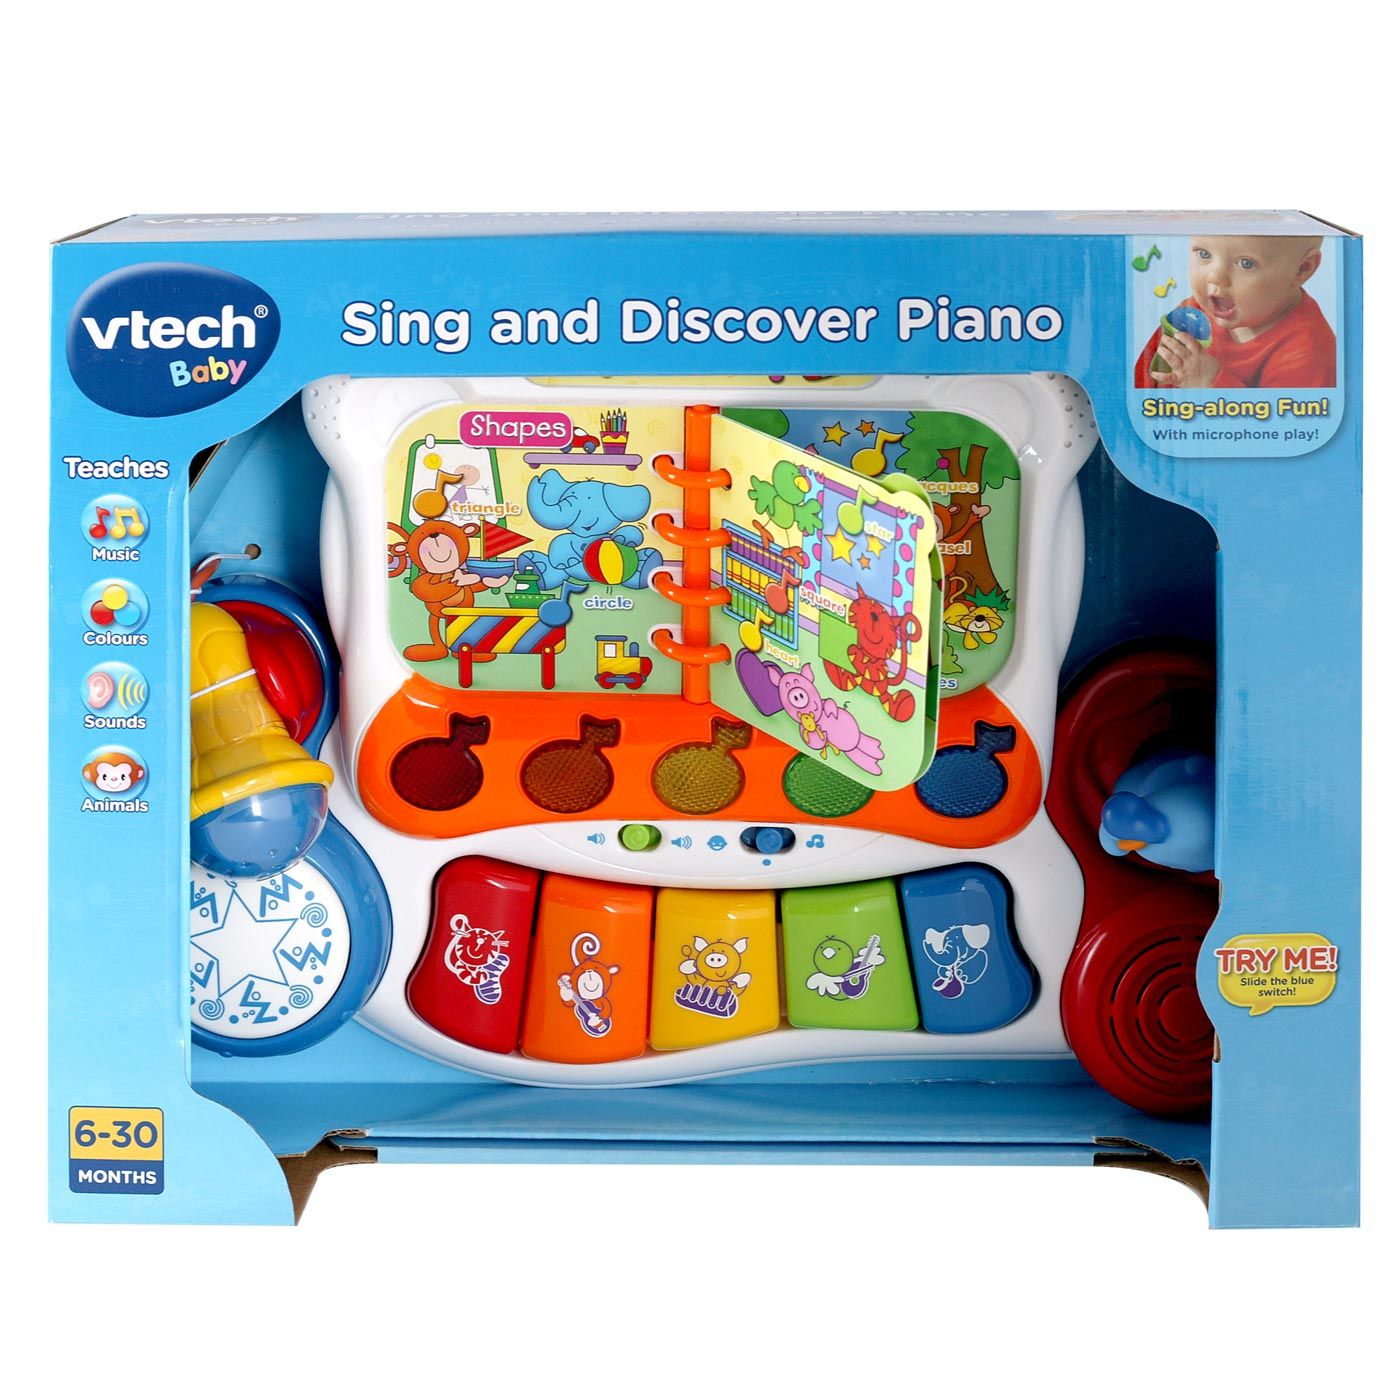 Free Vtech Sing And Discover Piano - 1